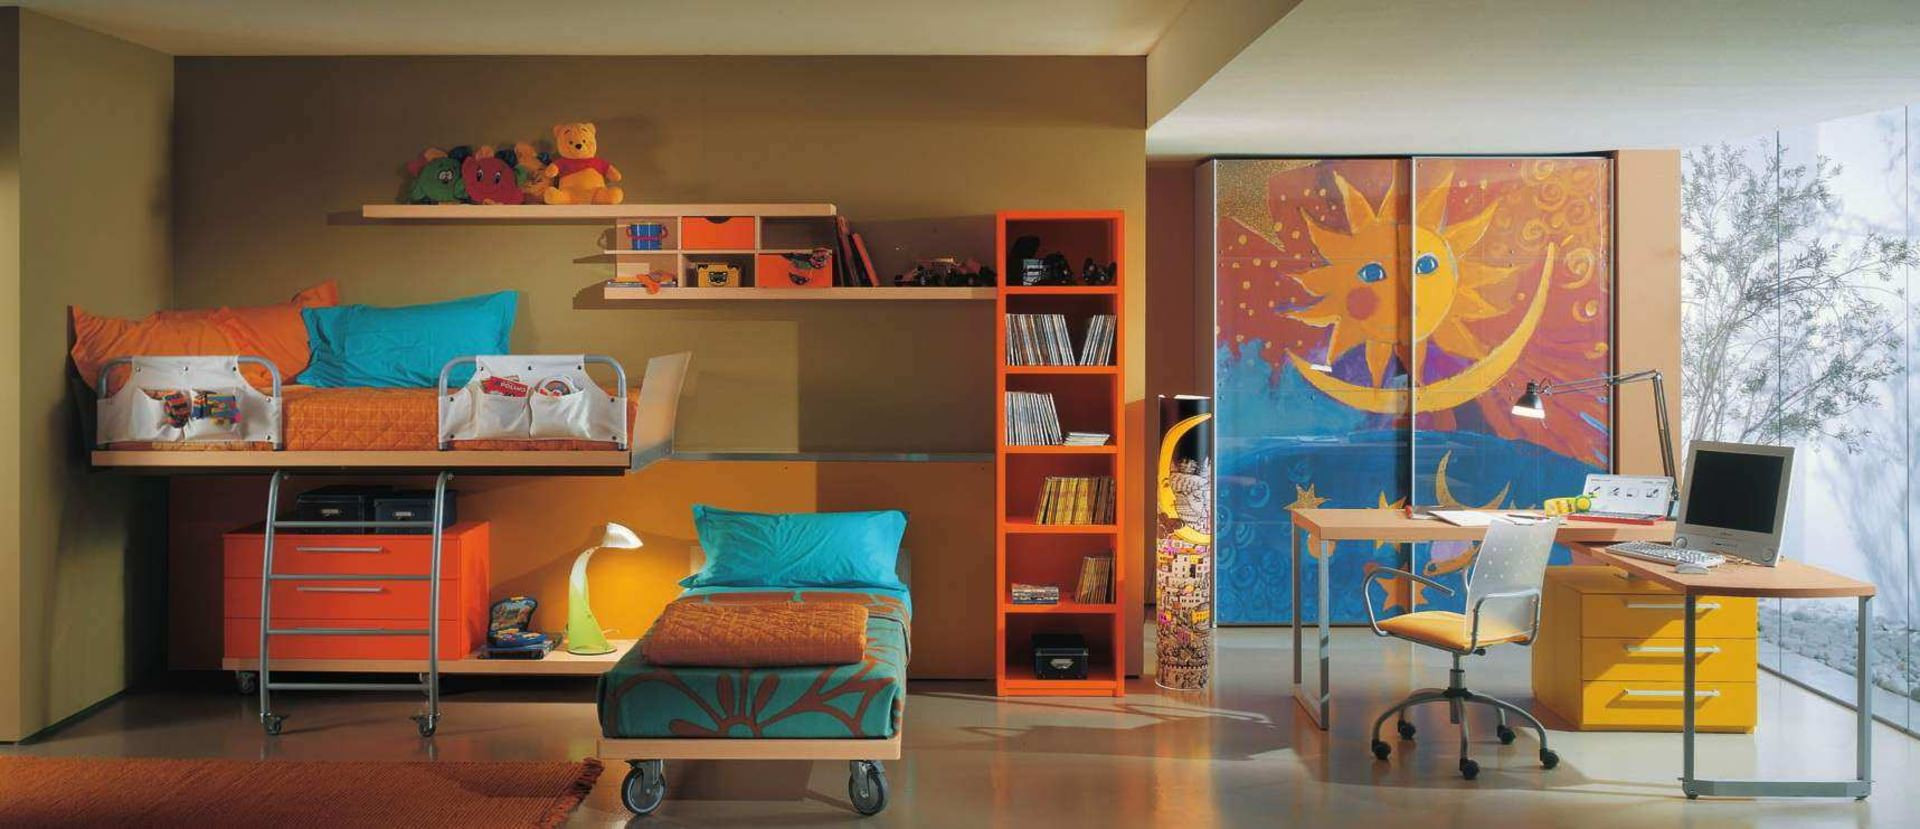 Table For Kids Room
 25 Kids’ Study Table Designs Home Designs